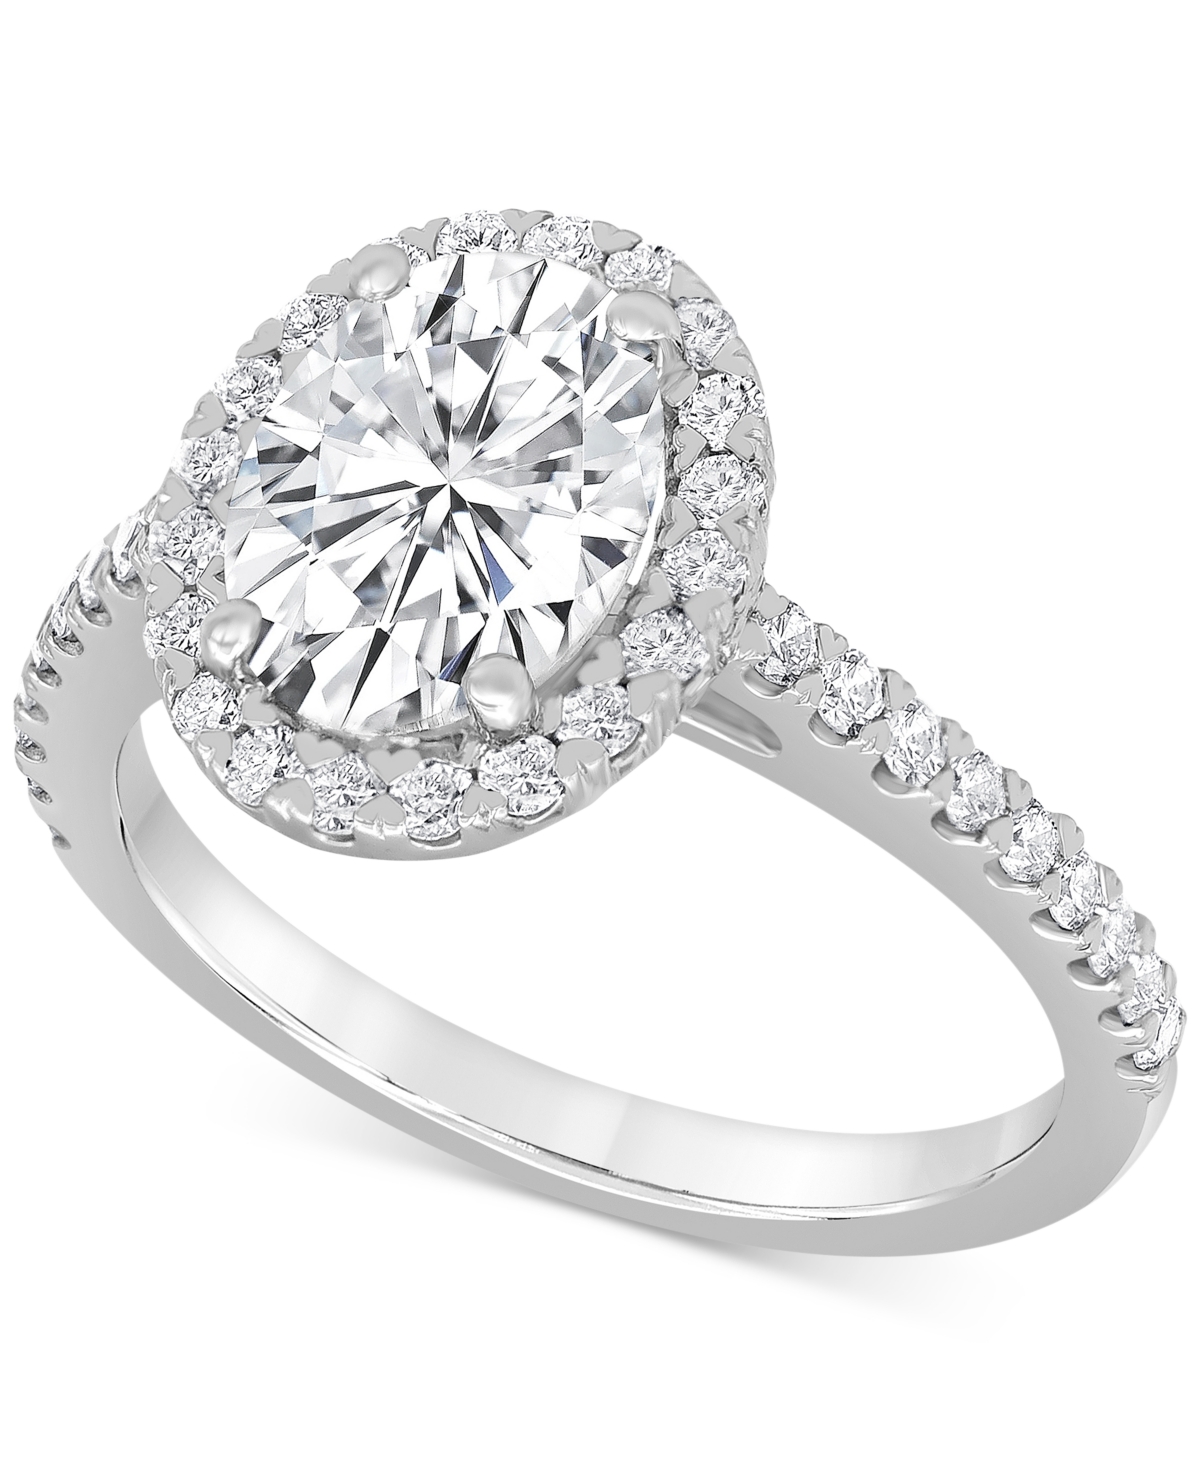 Badgley Mischka Certified Lab Grown Diamond Halo Engagement Ring (2-1/2 ct. t.w.) in 14k White Gold